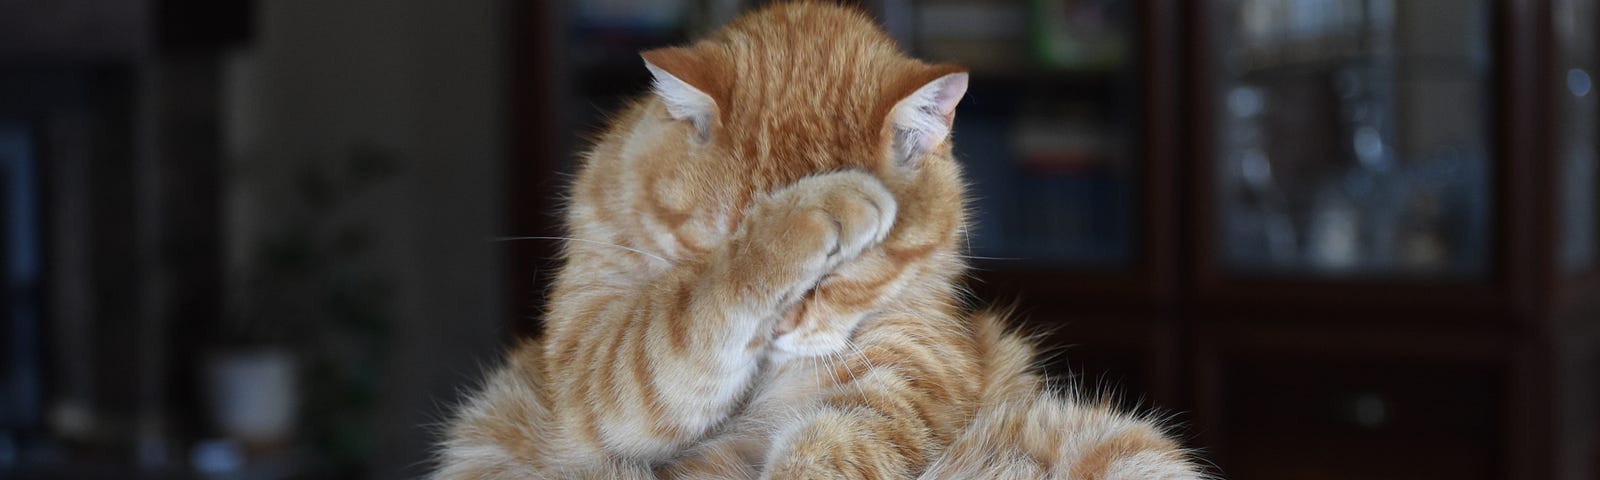 An orange tabby cat with its paw over its face.